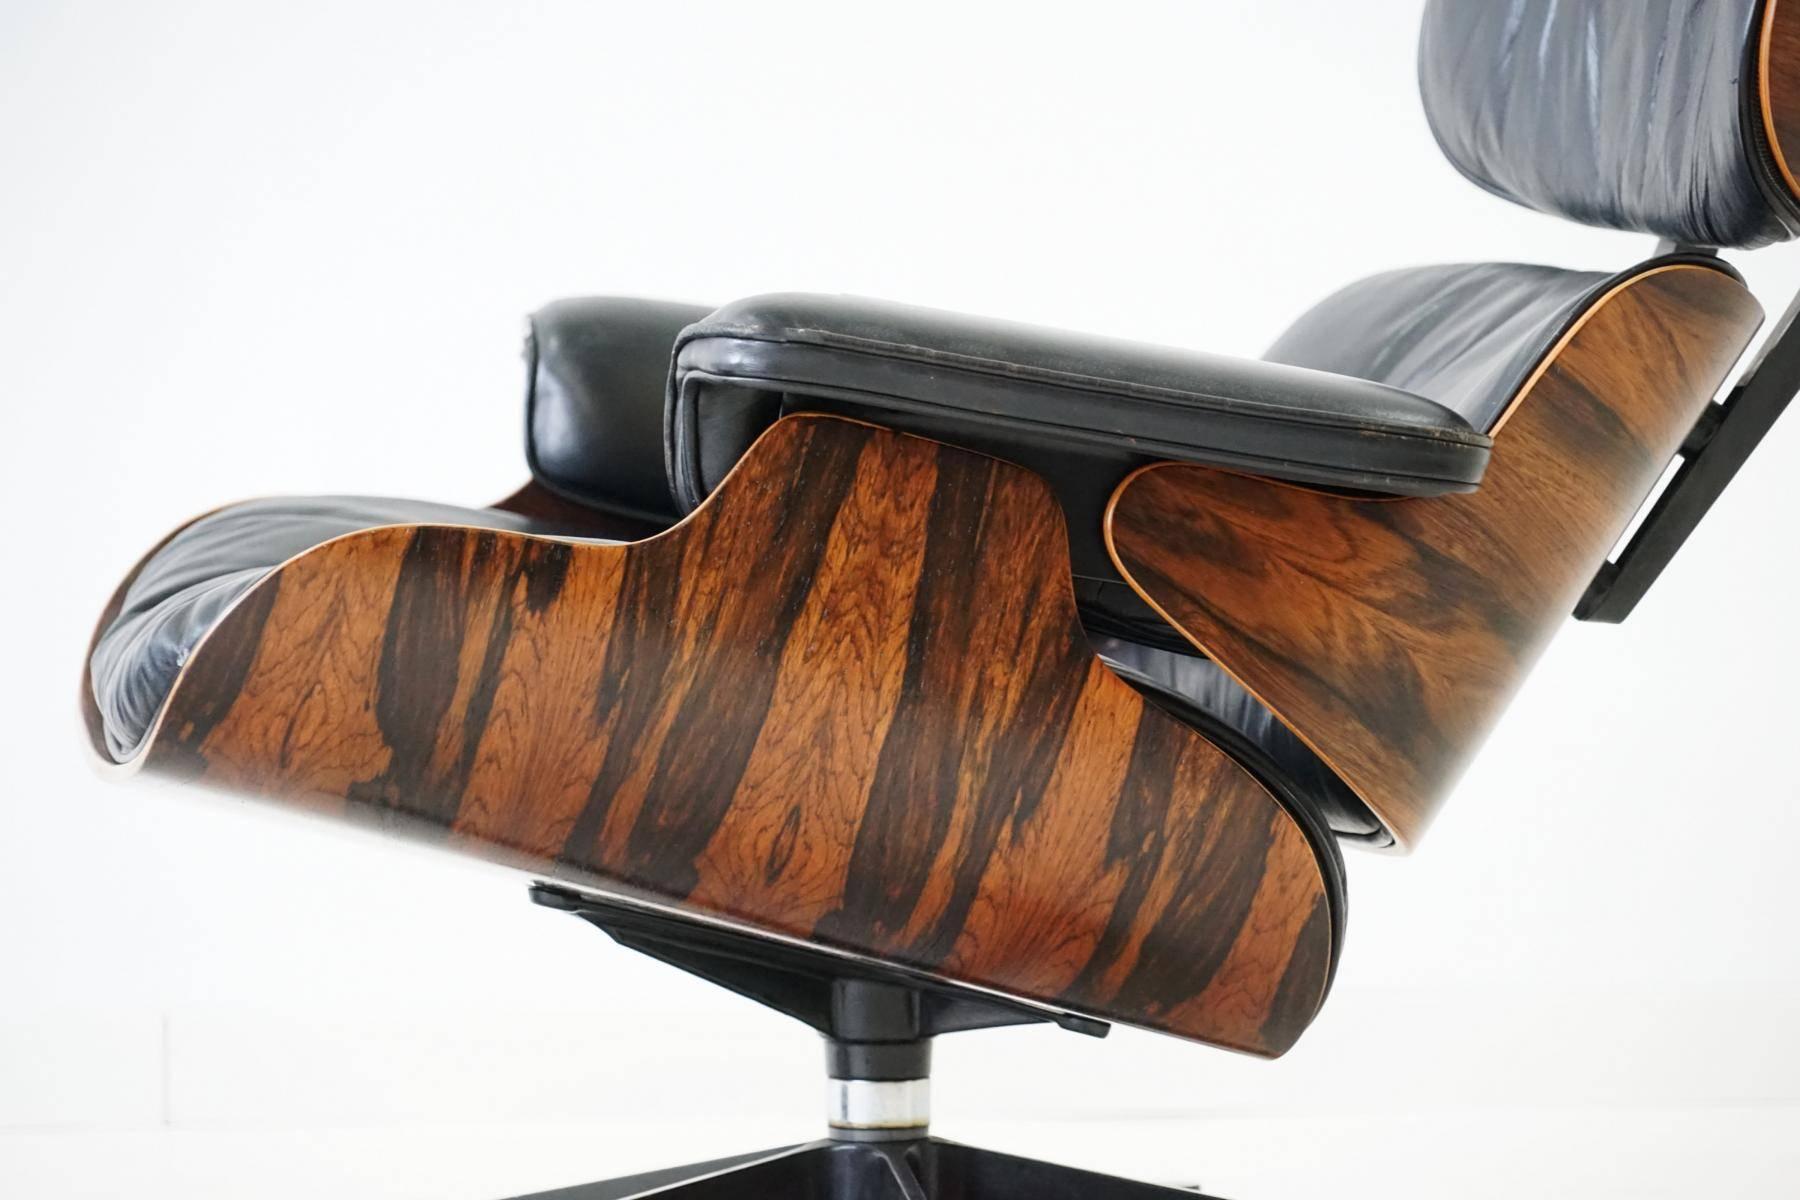 Mid-20th Century Original Lounge Chair and Ottoman, Charles Eames Herman Miller Rosewood Armchair